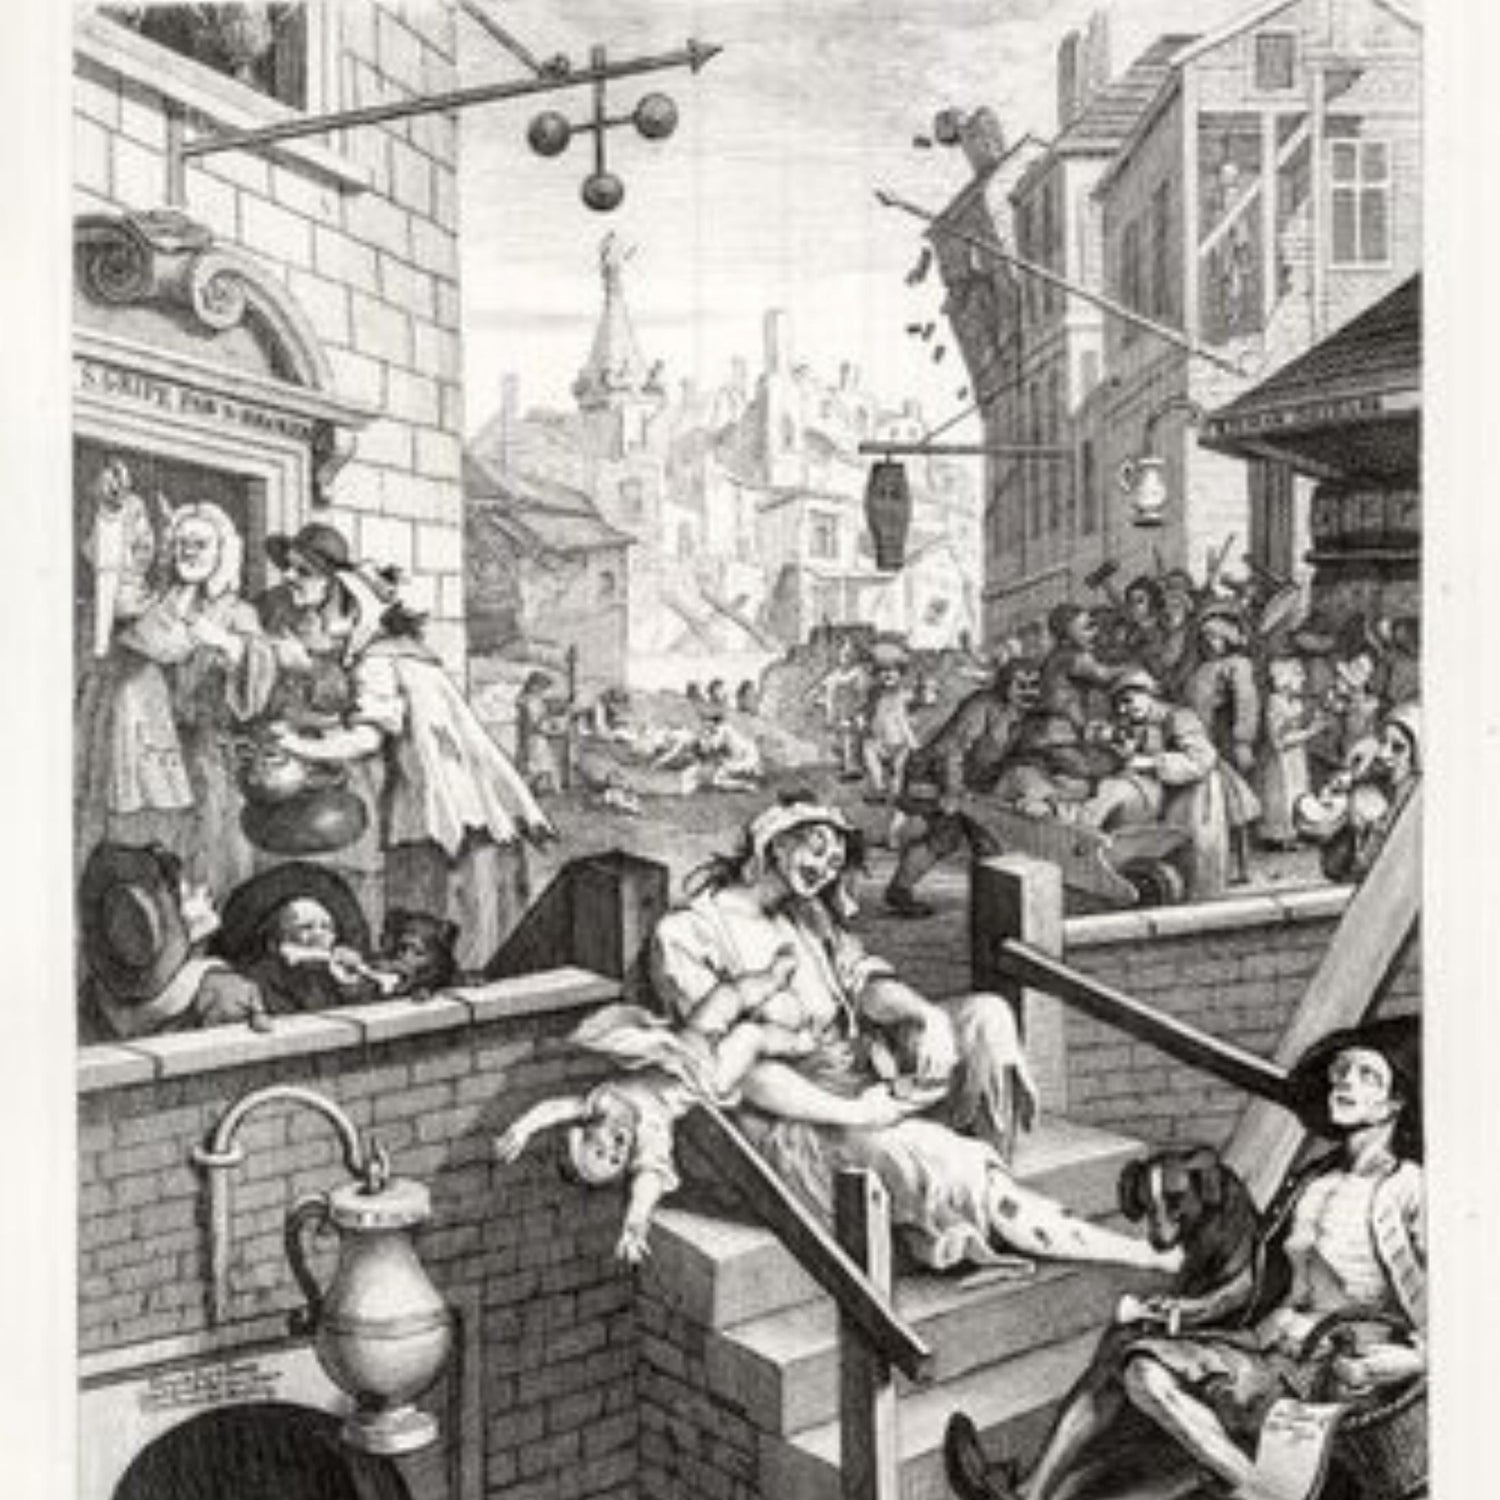 Gin Lane. The Gin Craze of affordable hooch made public drunkenness a massive problem, bringing forth the Gin Act of 1751. 